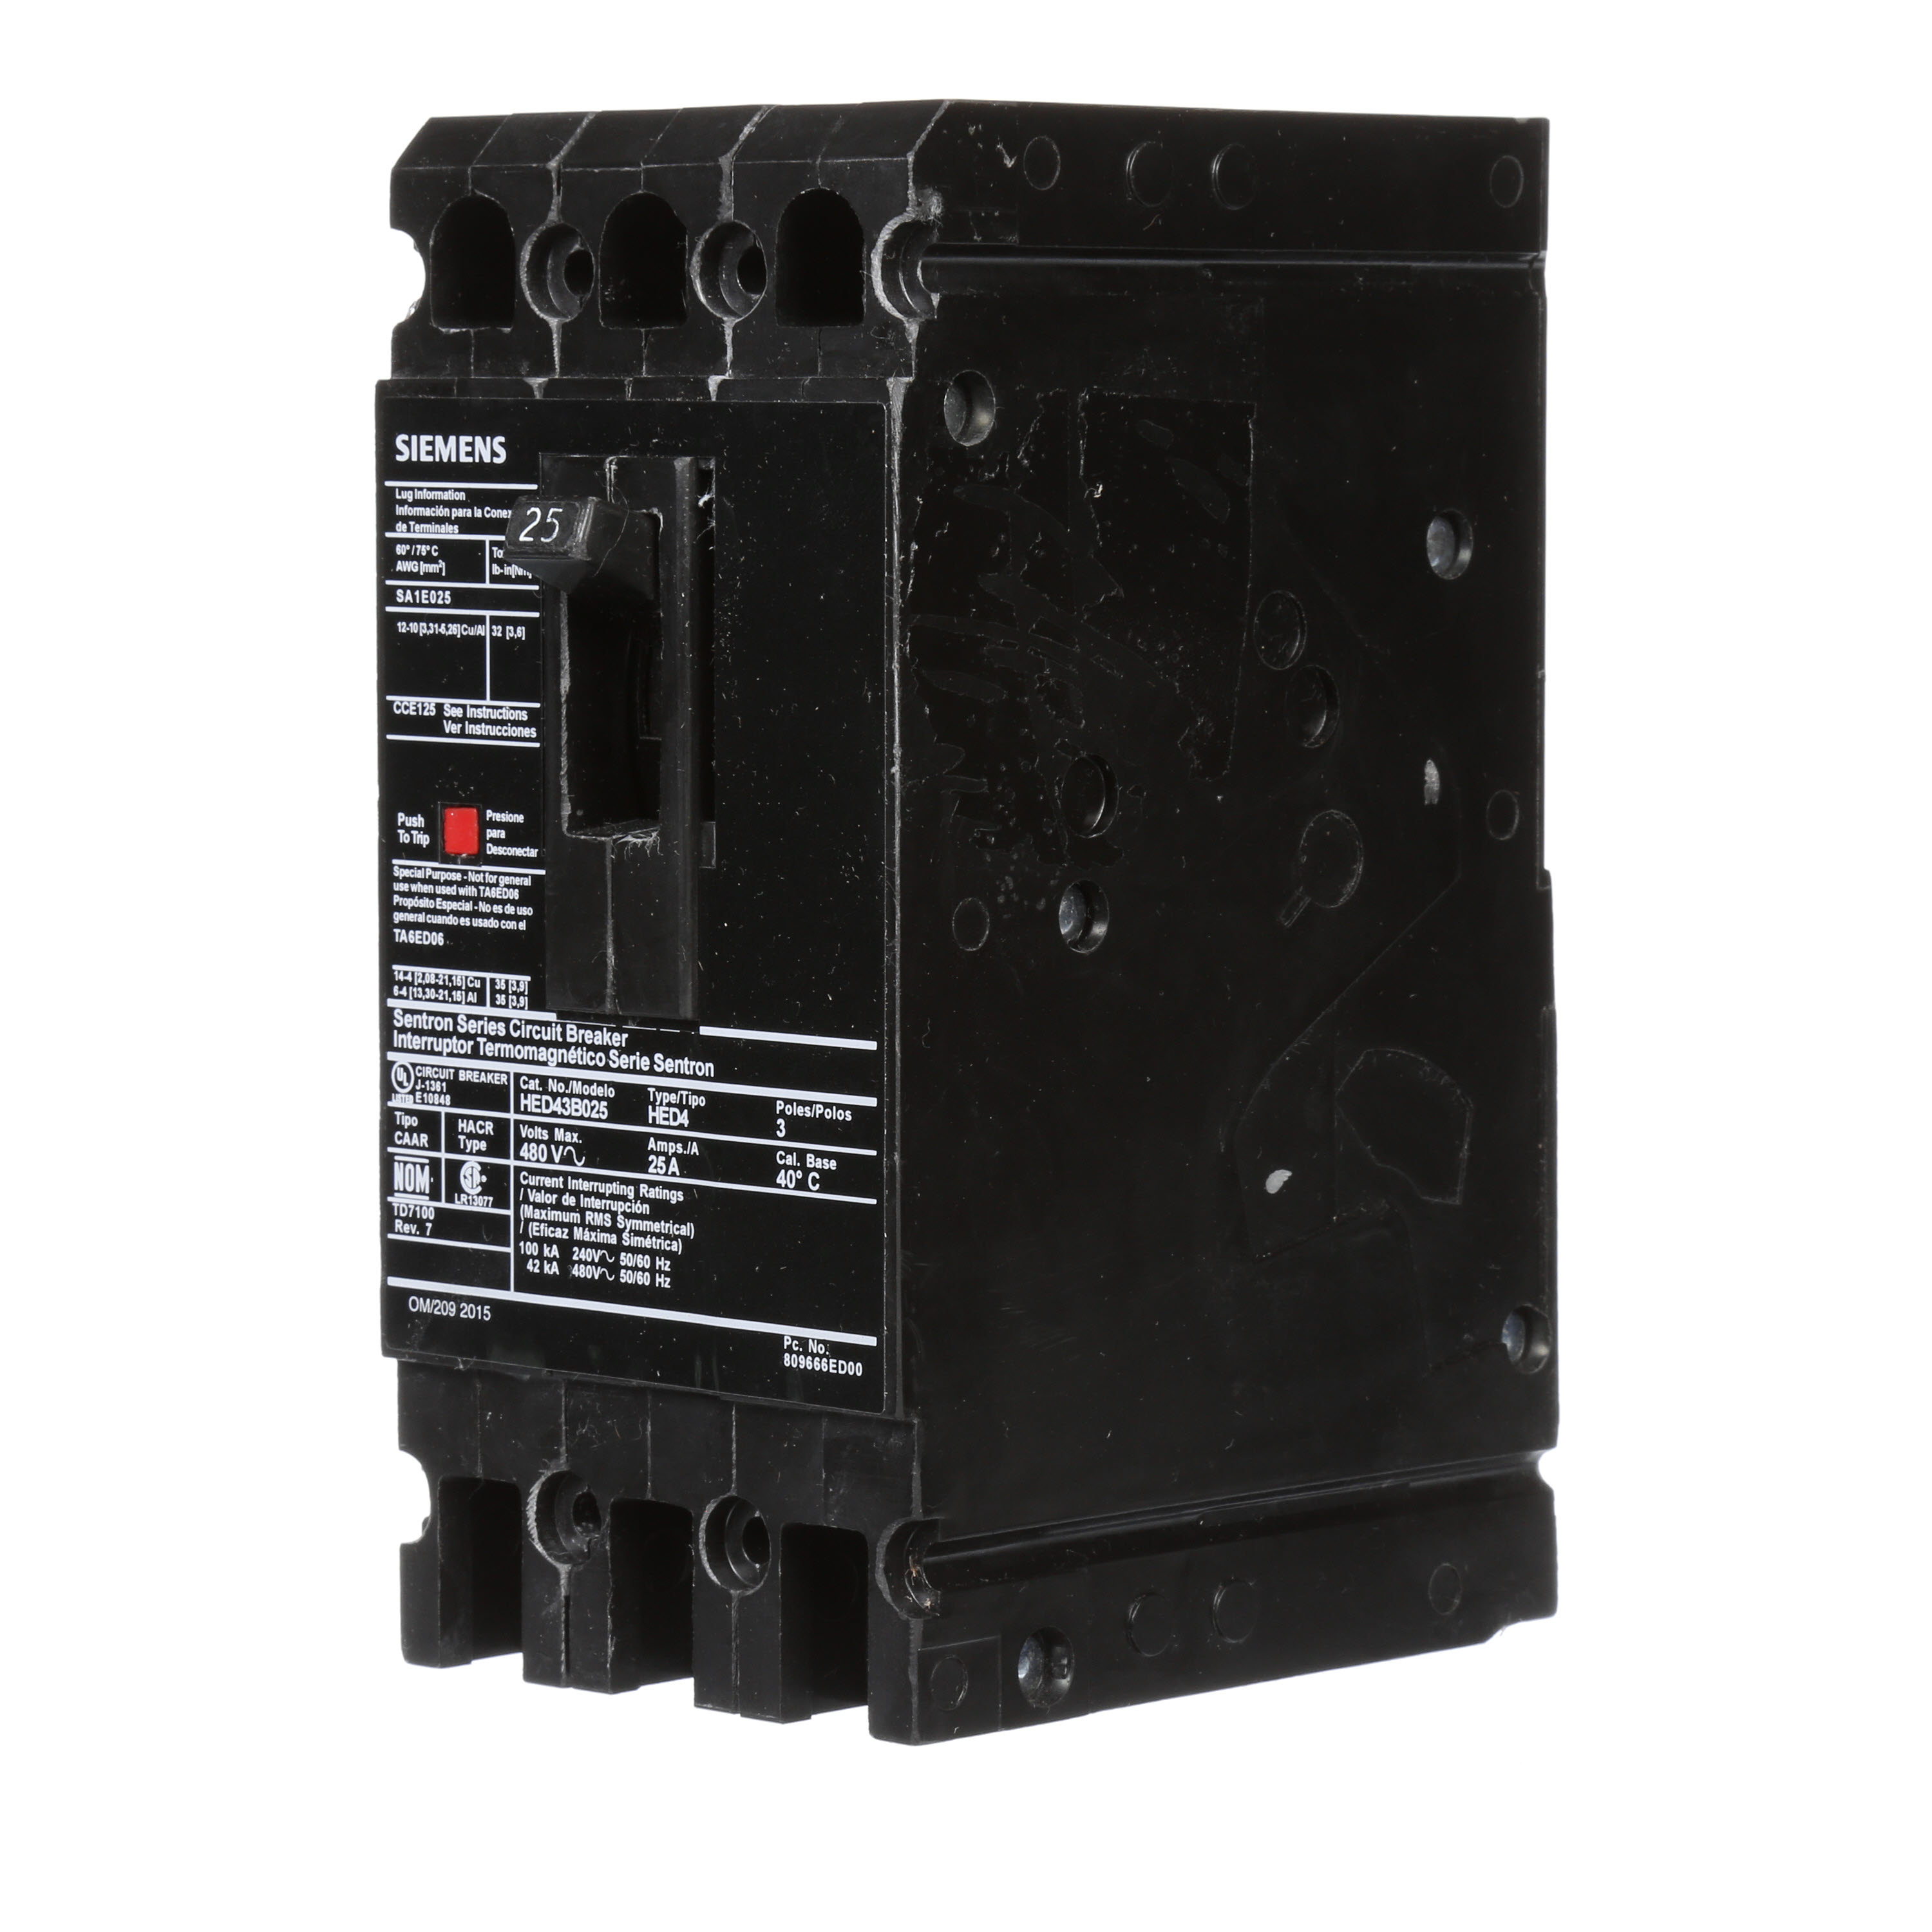 SIEMENS LOW VOLTAGE SENTRON MOLDED CASE CIRCUIT BREAKER WITH THERMAL - MAGNETICTRIP UNIT. STANDARD 40 DEG C BREAKER ED FRAME WITH HIGH BREAKING CAPACITY. 25A 3-POLE (42KAIC AT 480V). NON-INTERCHANGEABLE TRIP UNIT. SPECIAL FEATURES LOAD LUGS ONLY (SA1E025) WIRE RANGE 14 - 10AWG (CU) / 12 - 10AWG (AL). DIMENSIONS (W x H x D) IN 3.00 x 6.4 x 3.92.